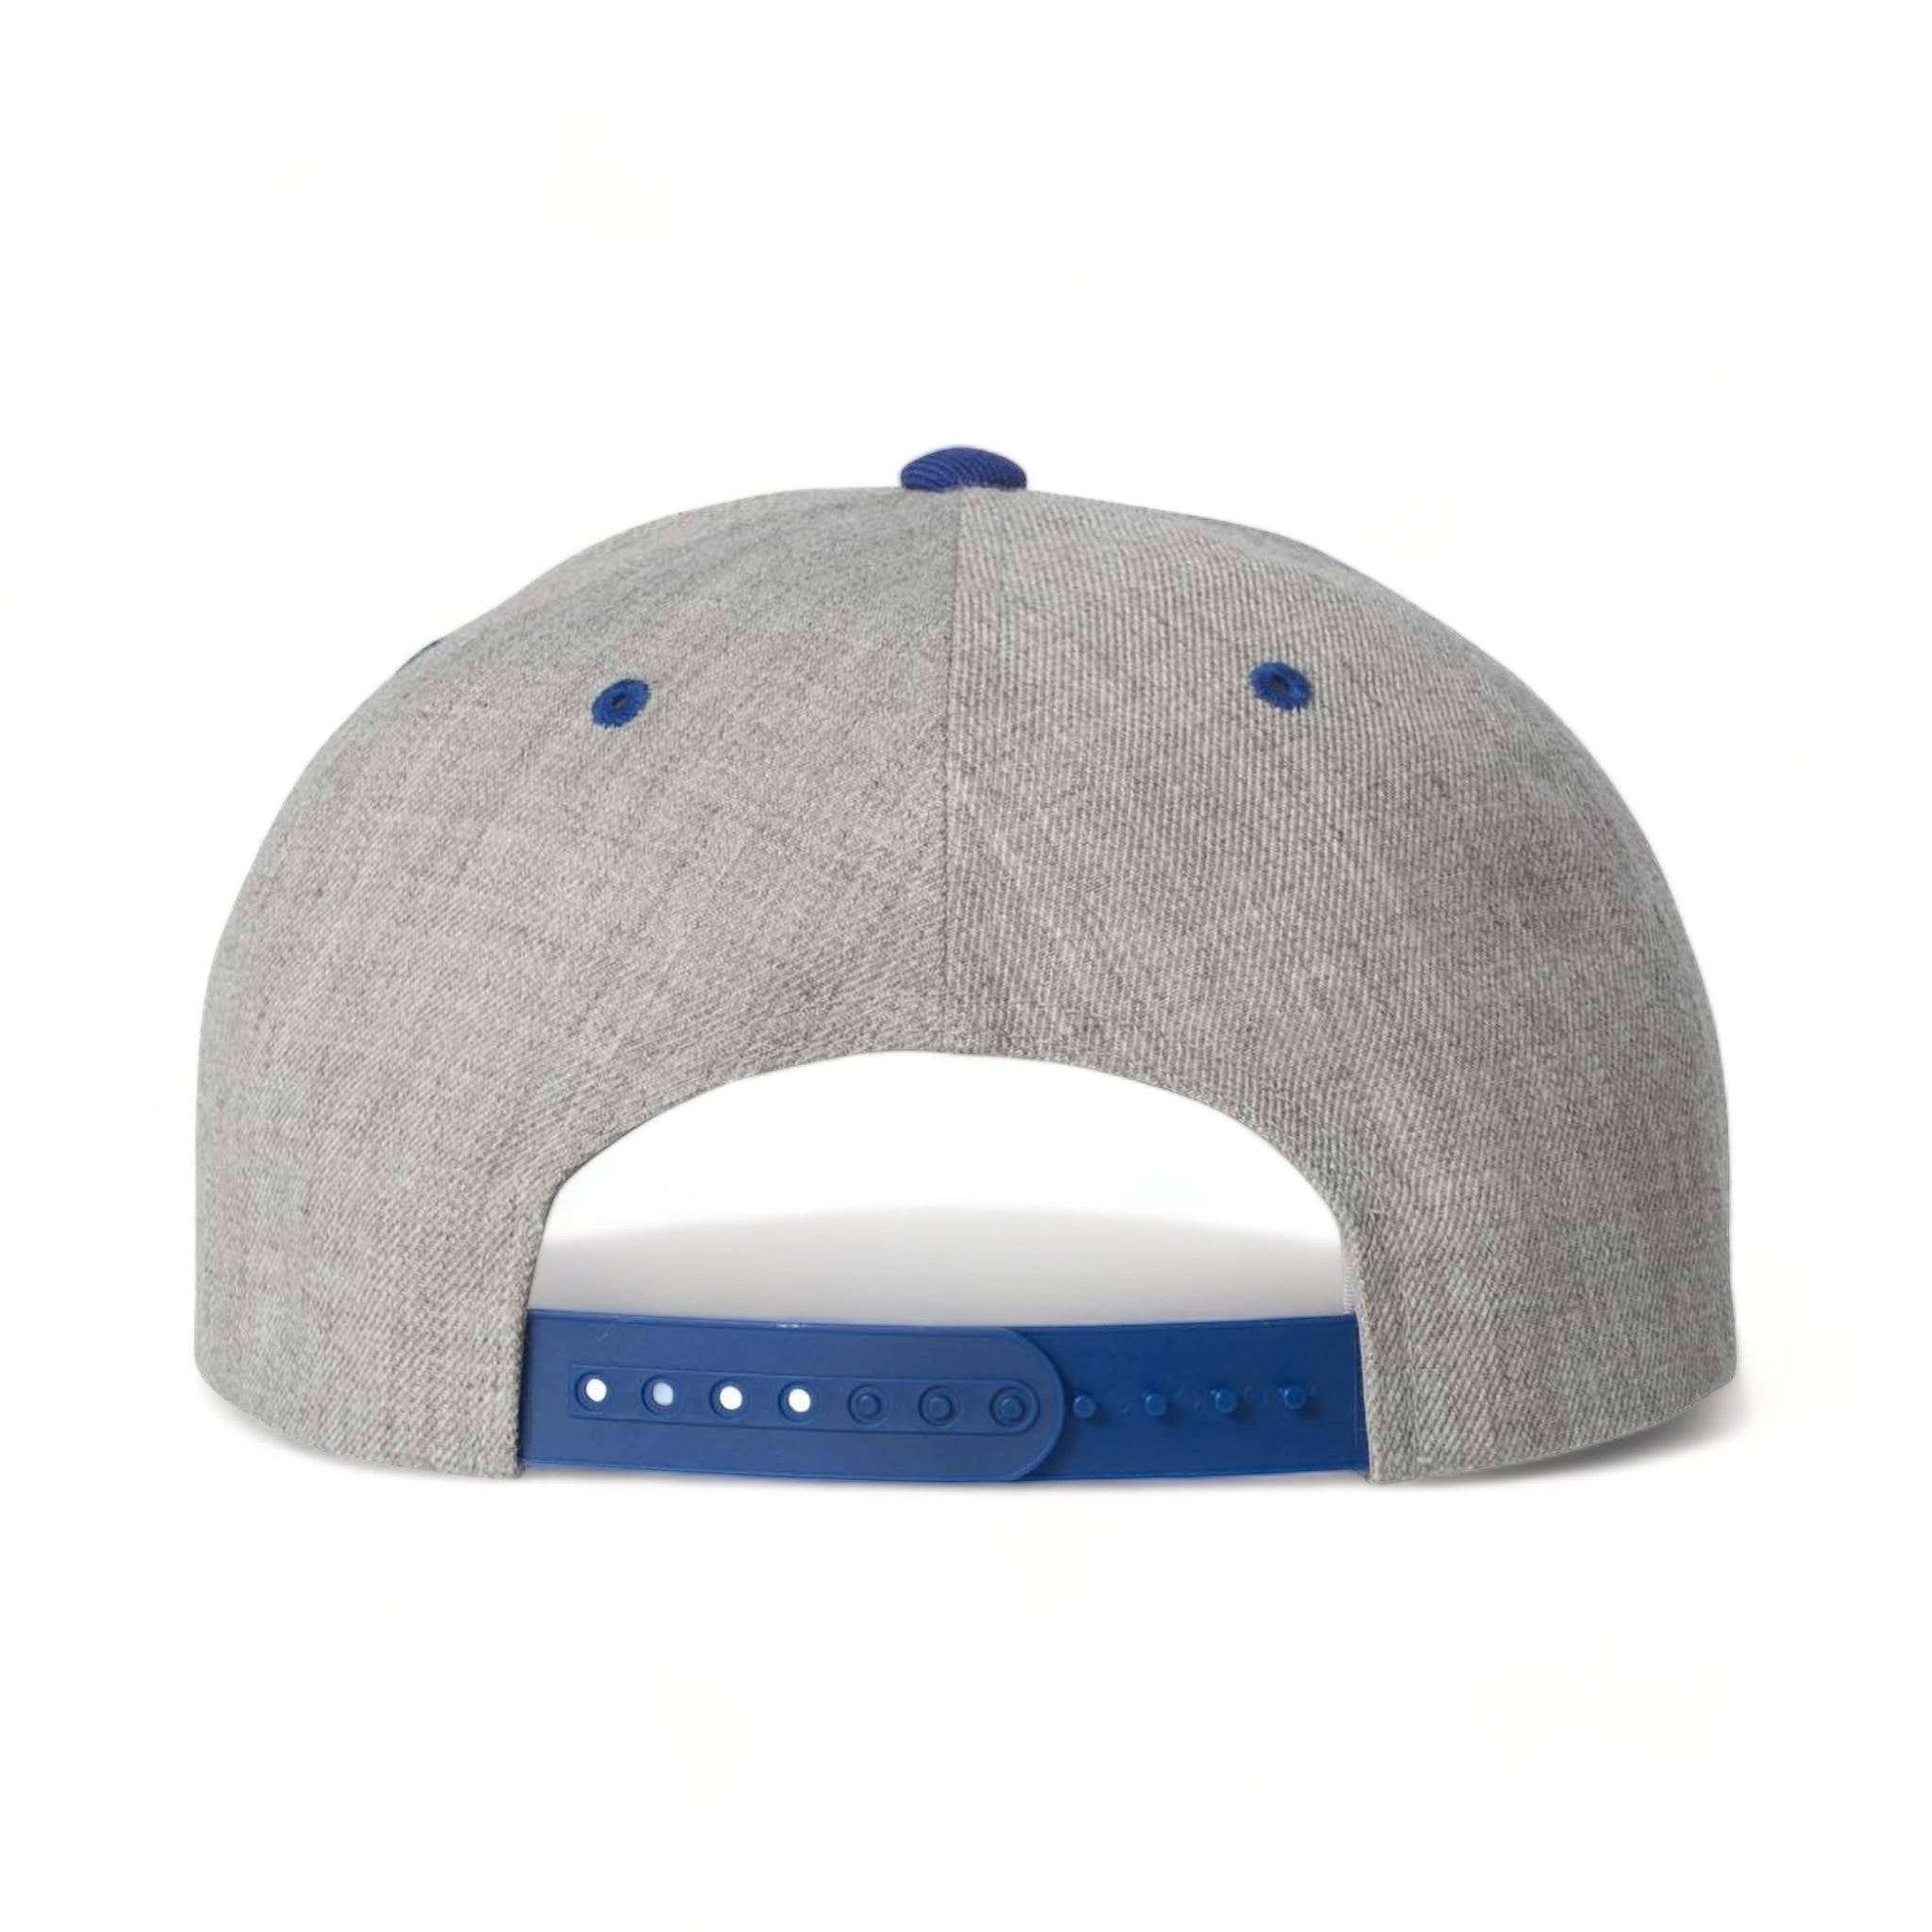 Back view of YP Classics 6089M custom hat in heather grey and royal